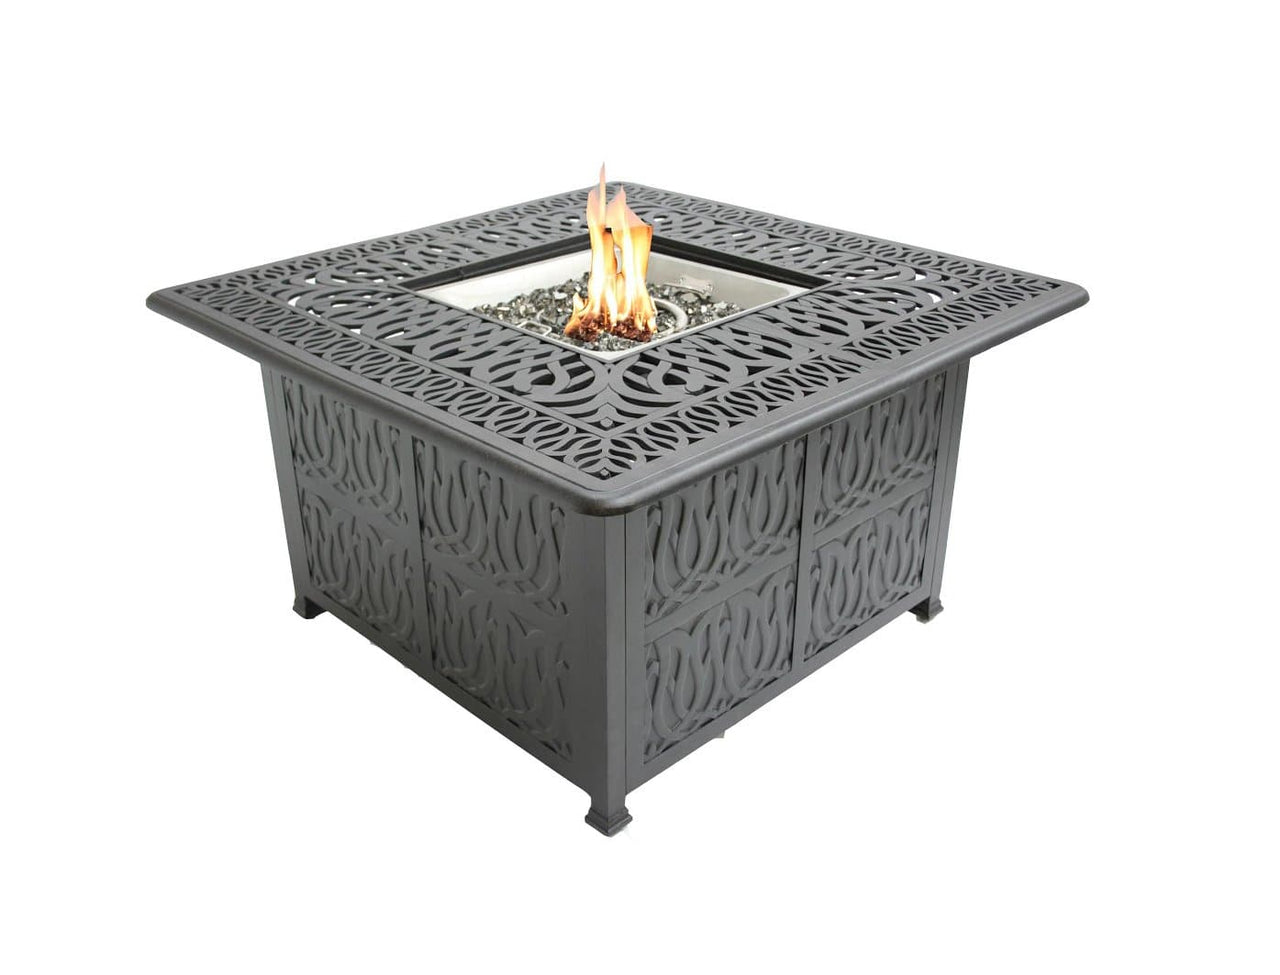 Comfort Care Ariana Exquisite 44"Square Fire Table Table with Burner - Senior.com Fire Tables